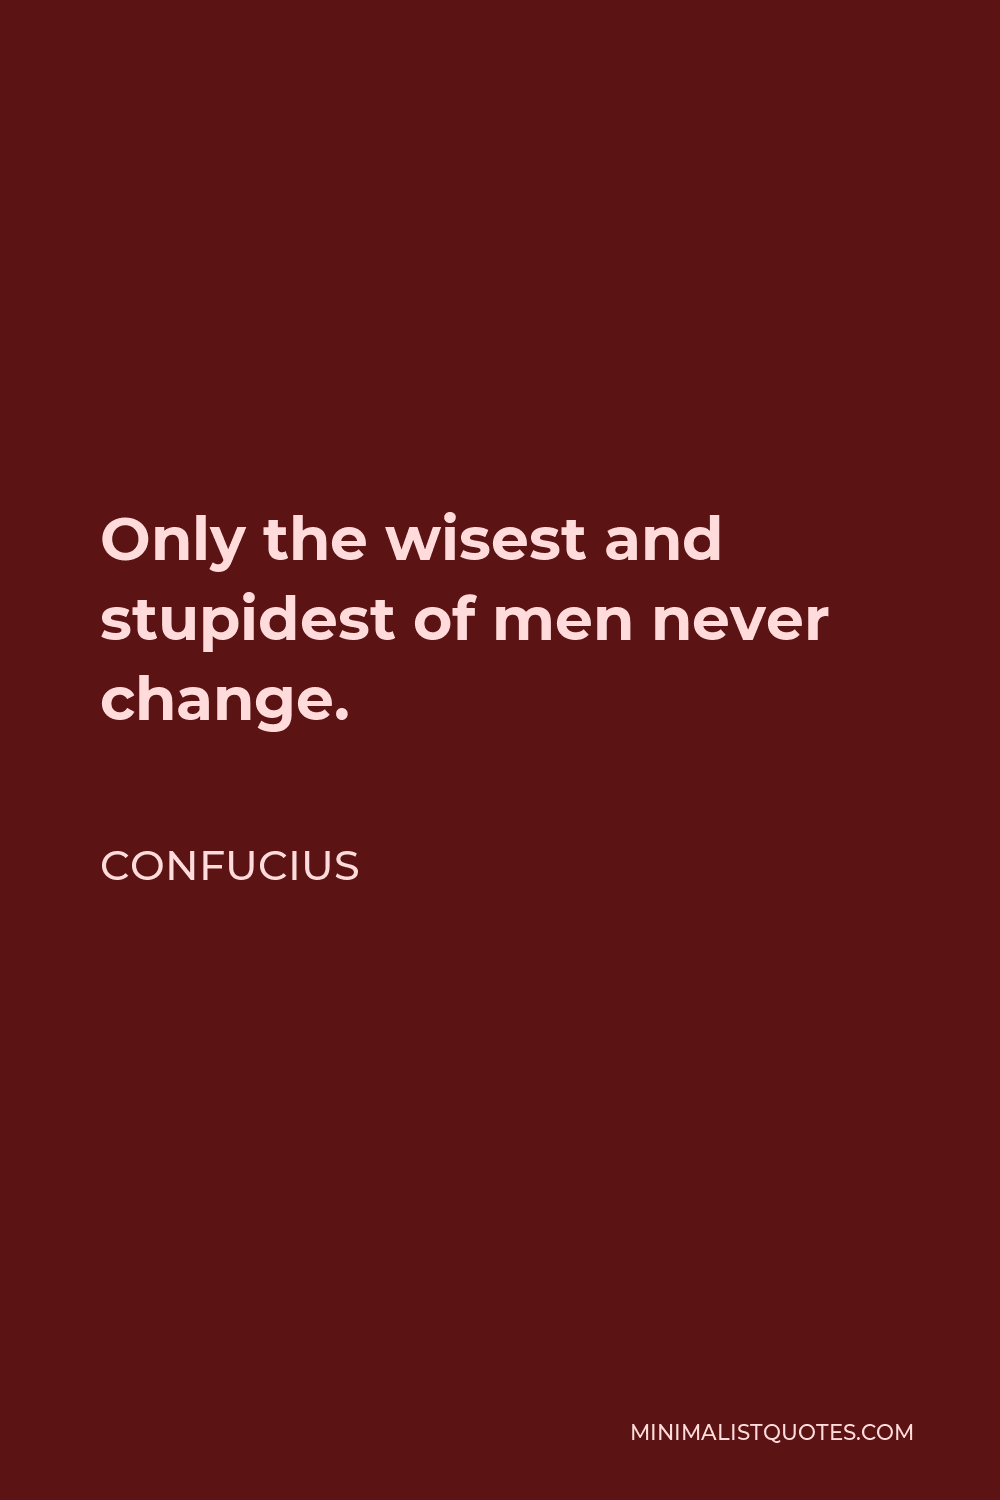 Confucius Quote - Only the wisest and stupidest of men never change.